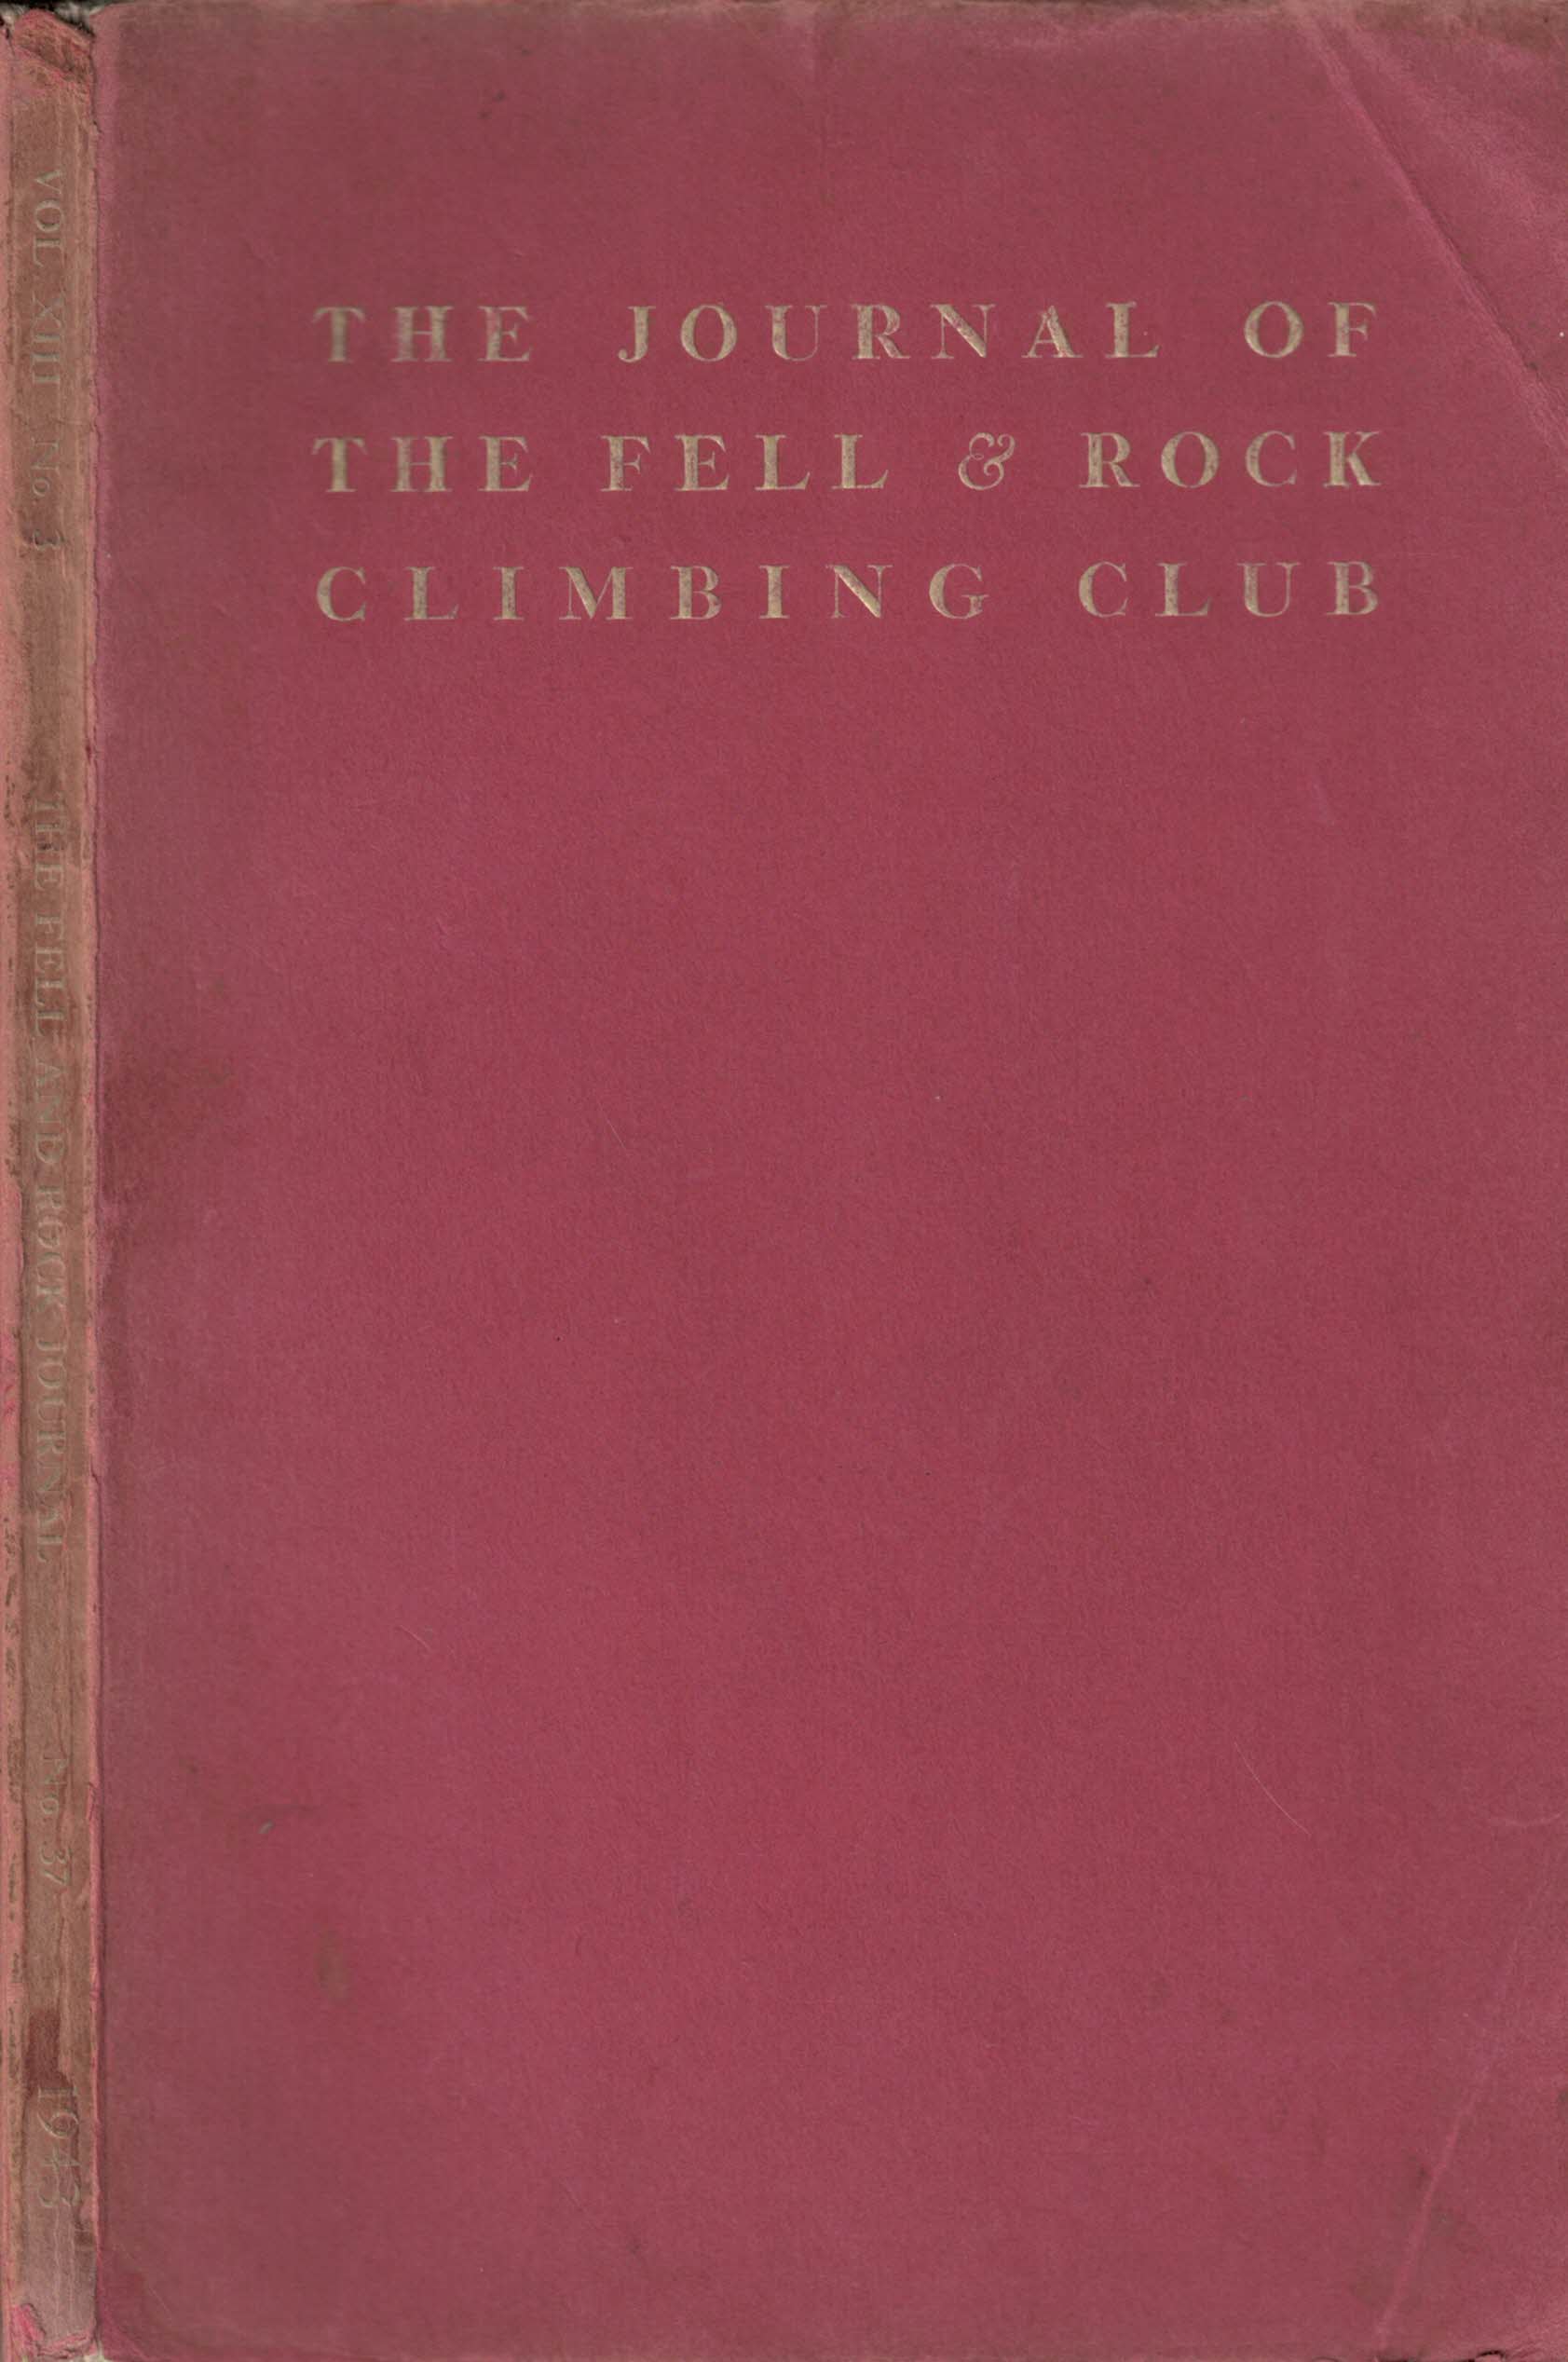 The Journal of the Fell & Rock Climbing Club of the English Lake District. No 37, (Volume 13 No 3) 1943.